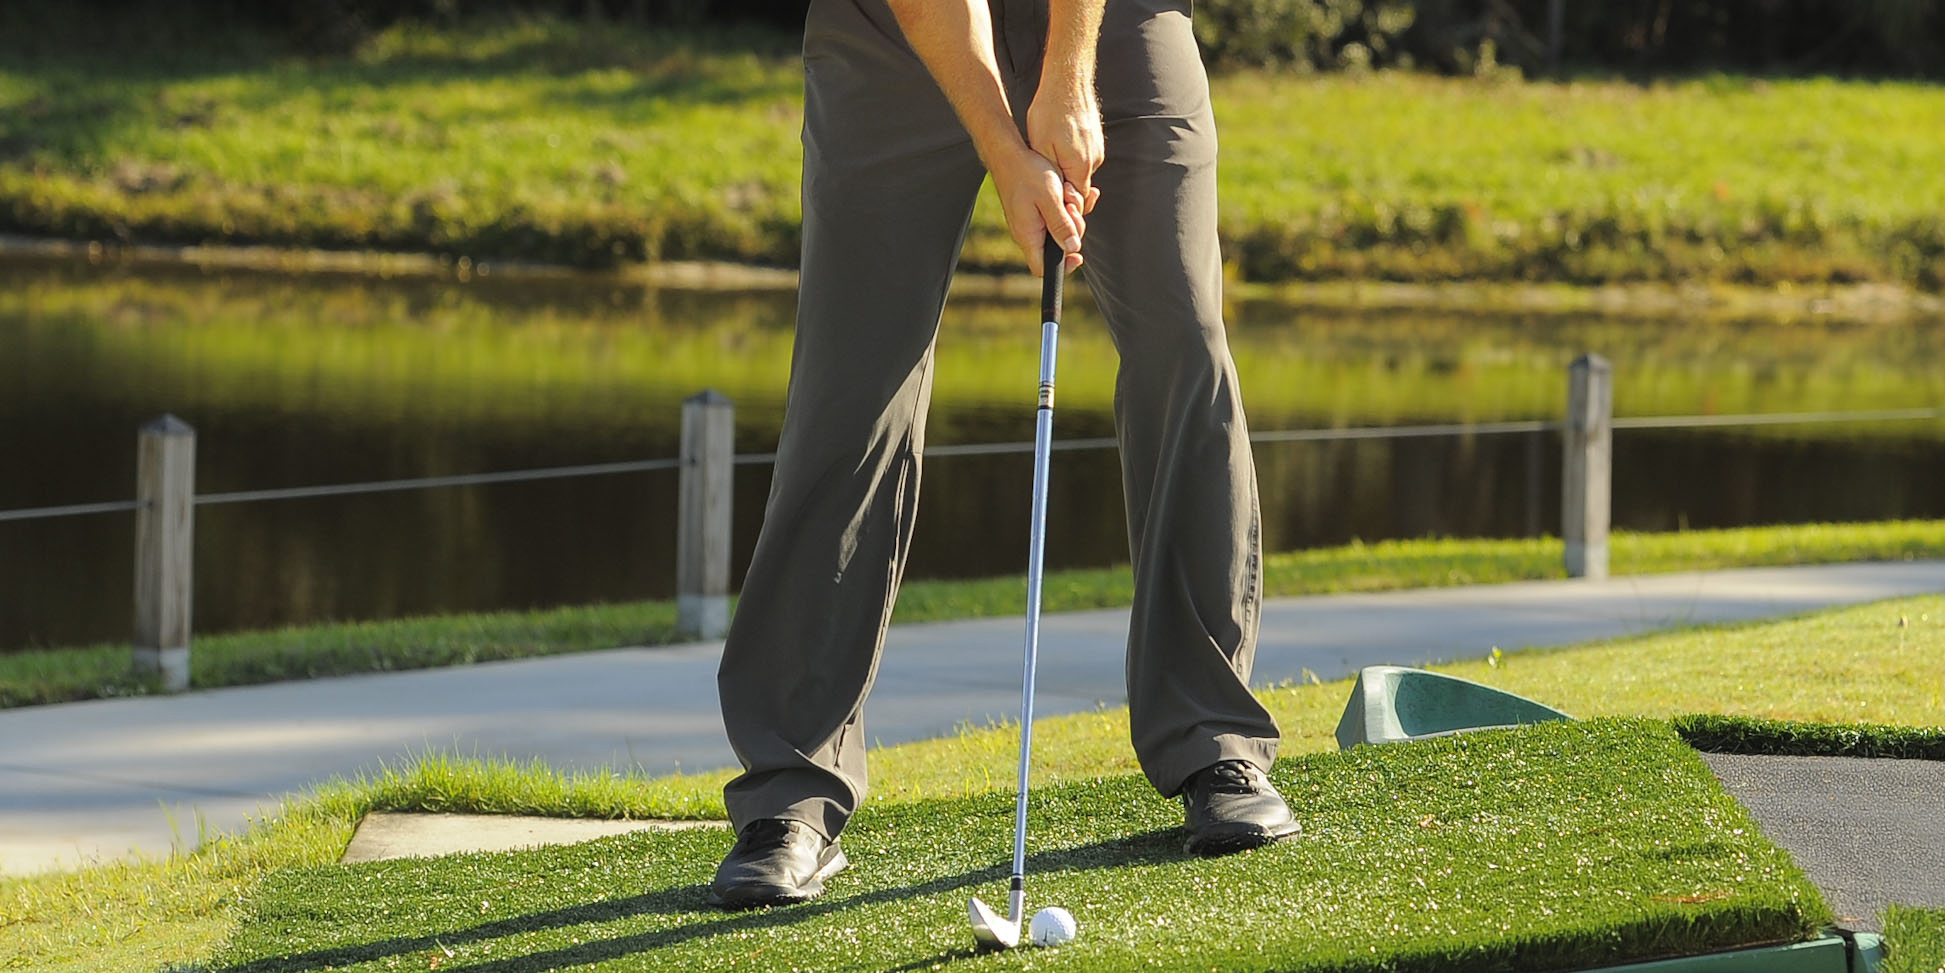 How to Play Uneven Lies in Golf